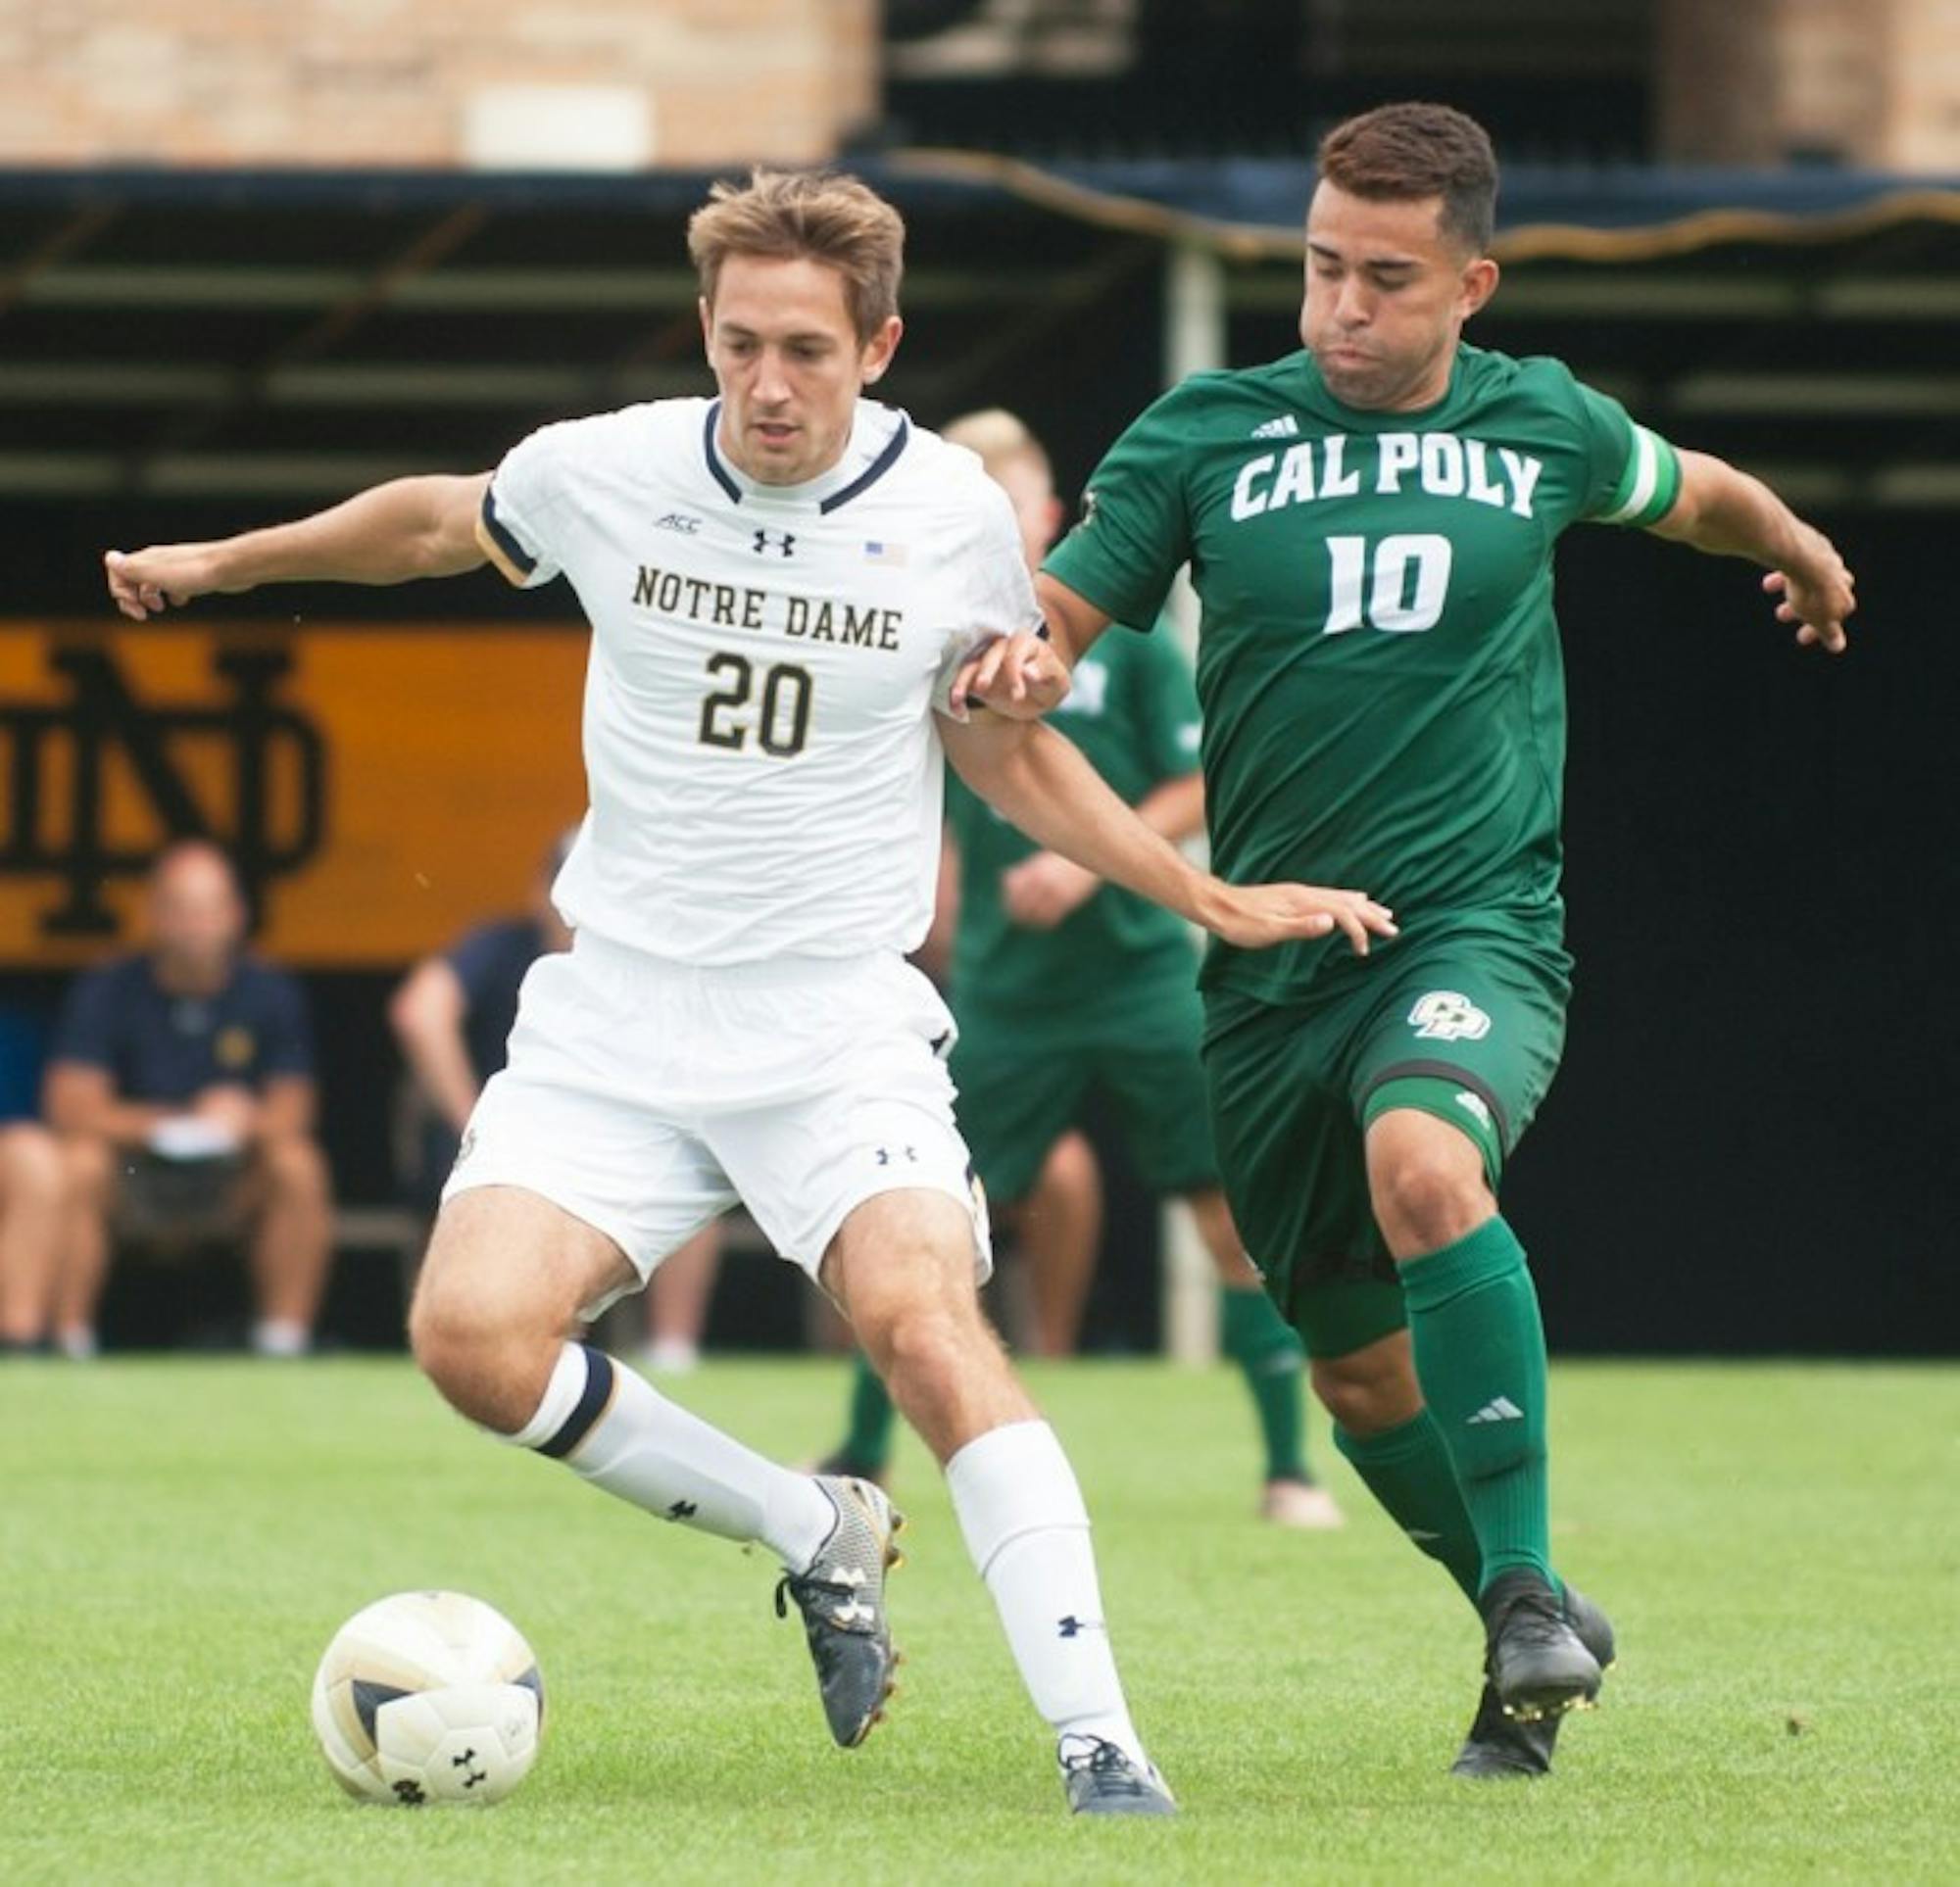 Irish senior midfielder Blake Townes dribbles around the defense during Notre Dame’s 2-1 double overtime victory over Cal Poly on Aug. 27 at Alumni Stadium.